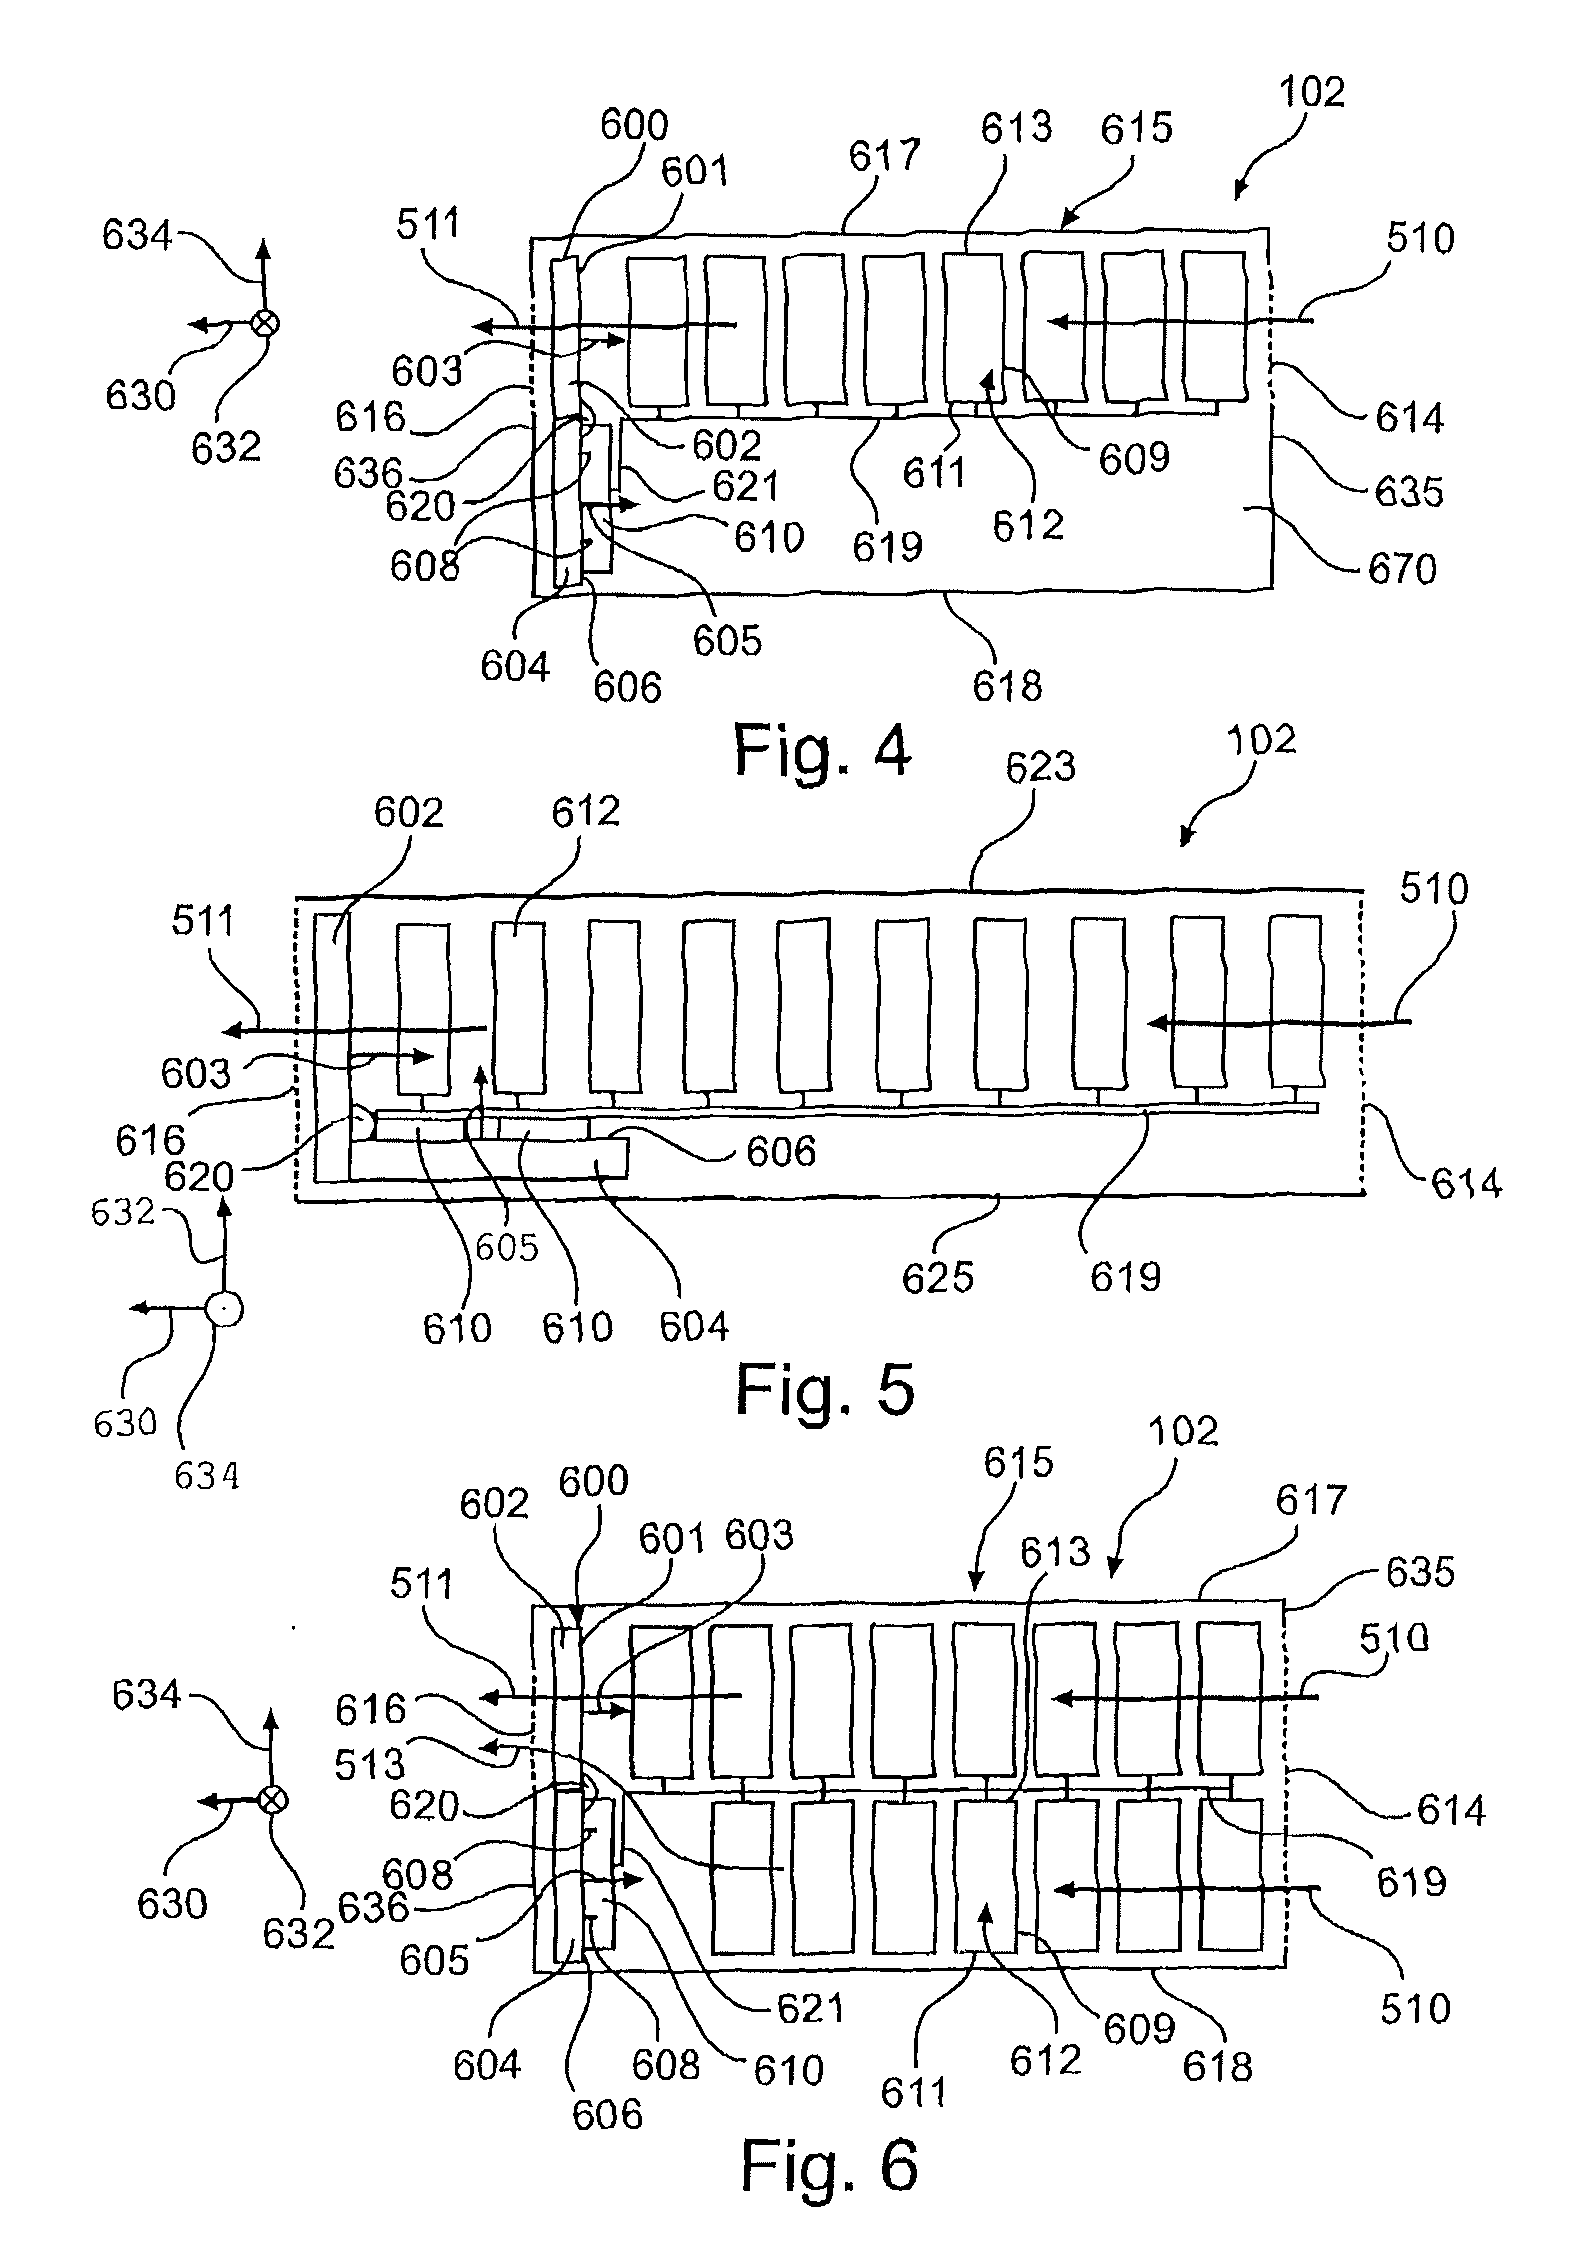 Thermosiphon cooler arrangement in modules with electric and/or electronic components